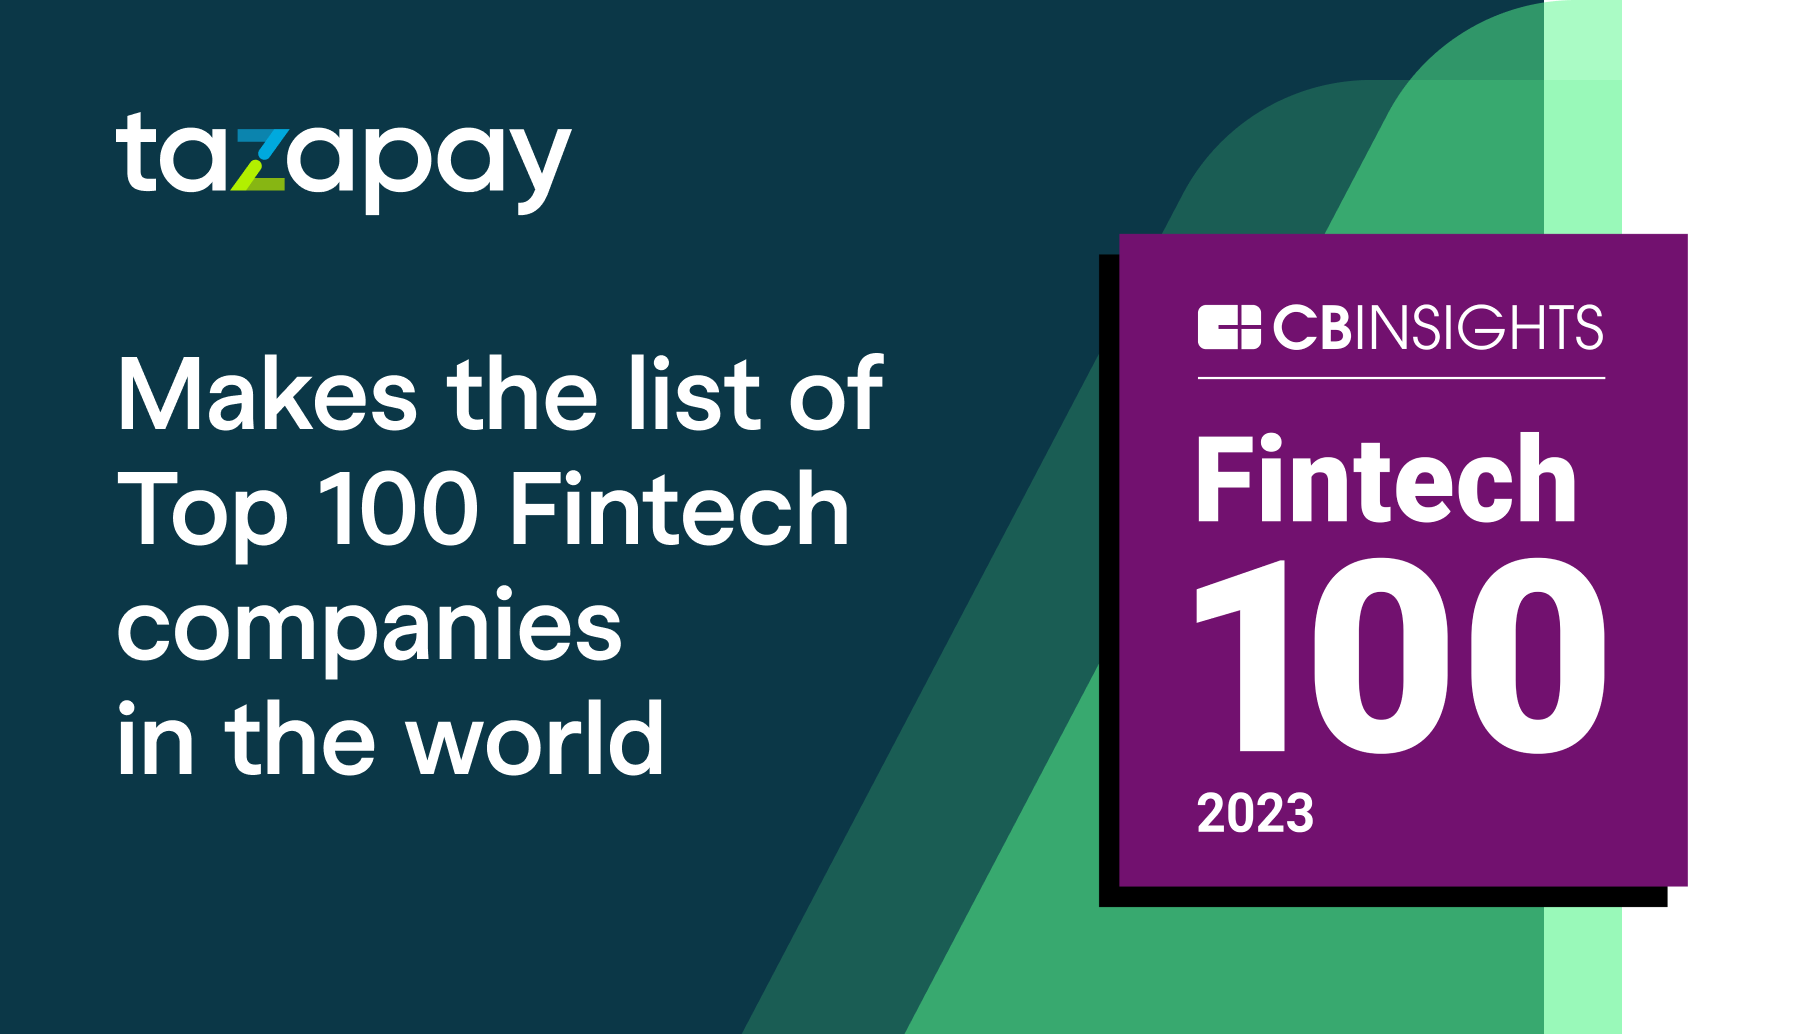 Tazapay Named to the 2023 CB Insights' Fintech 100 List